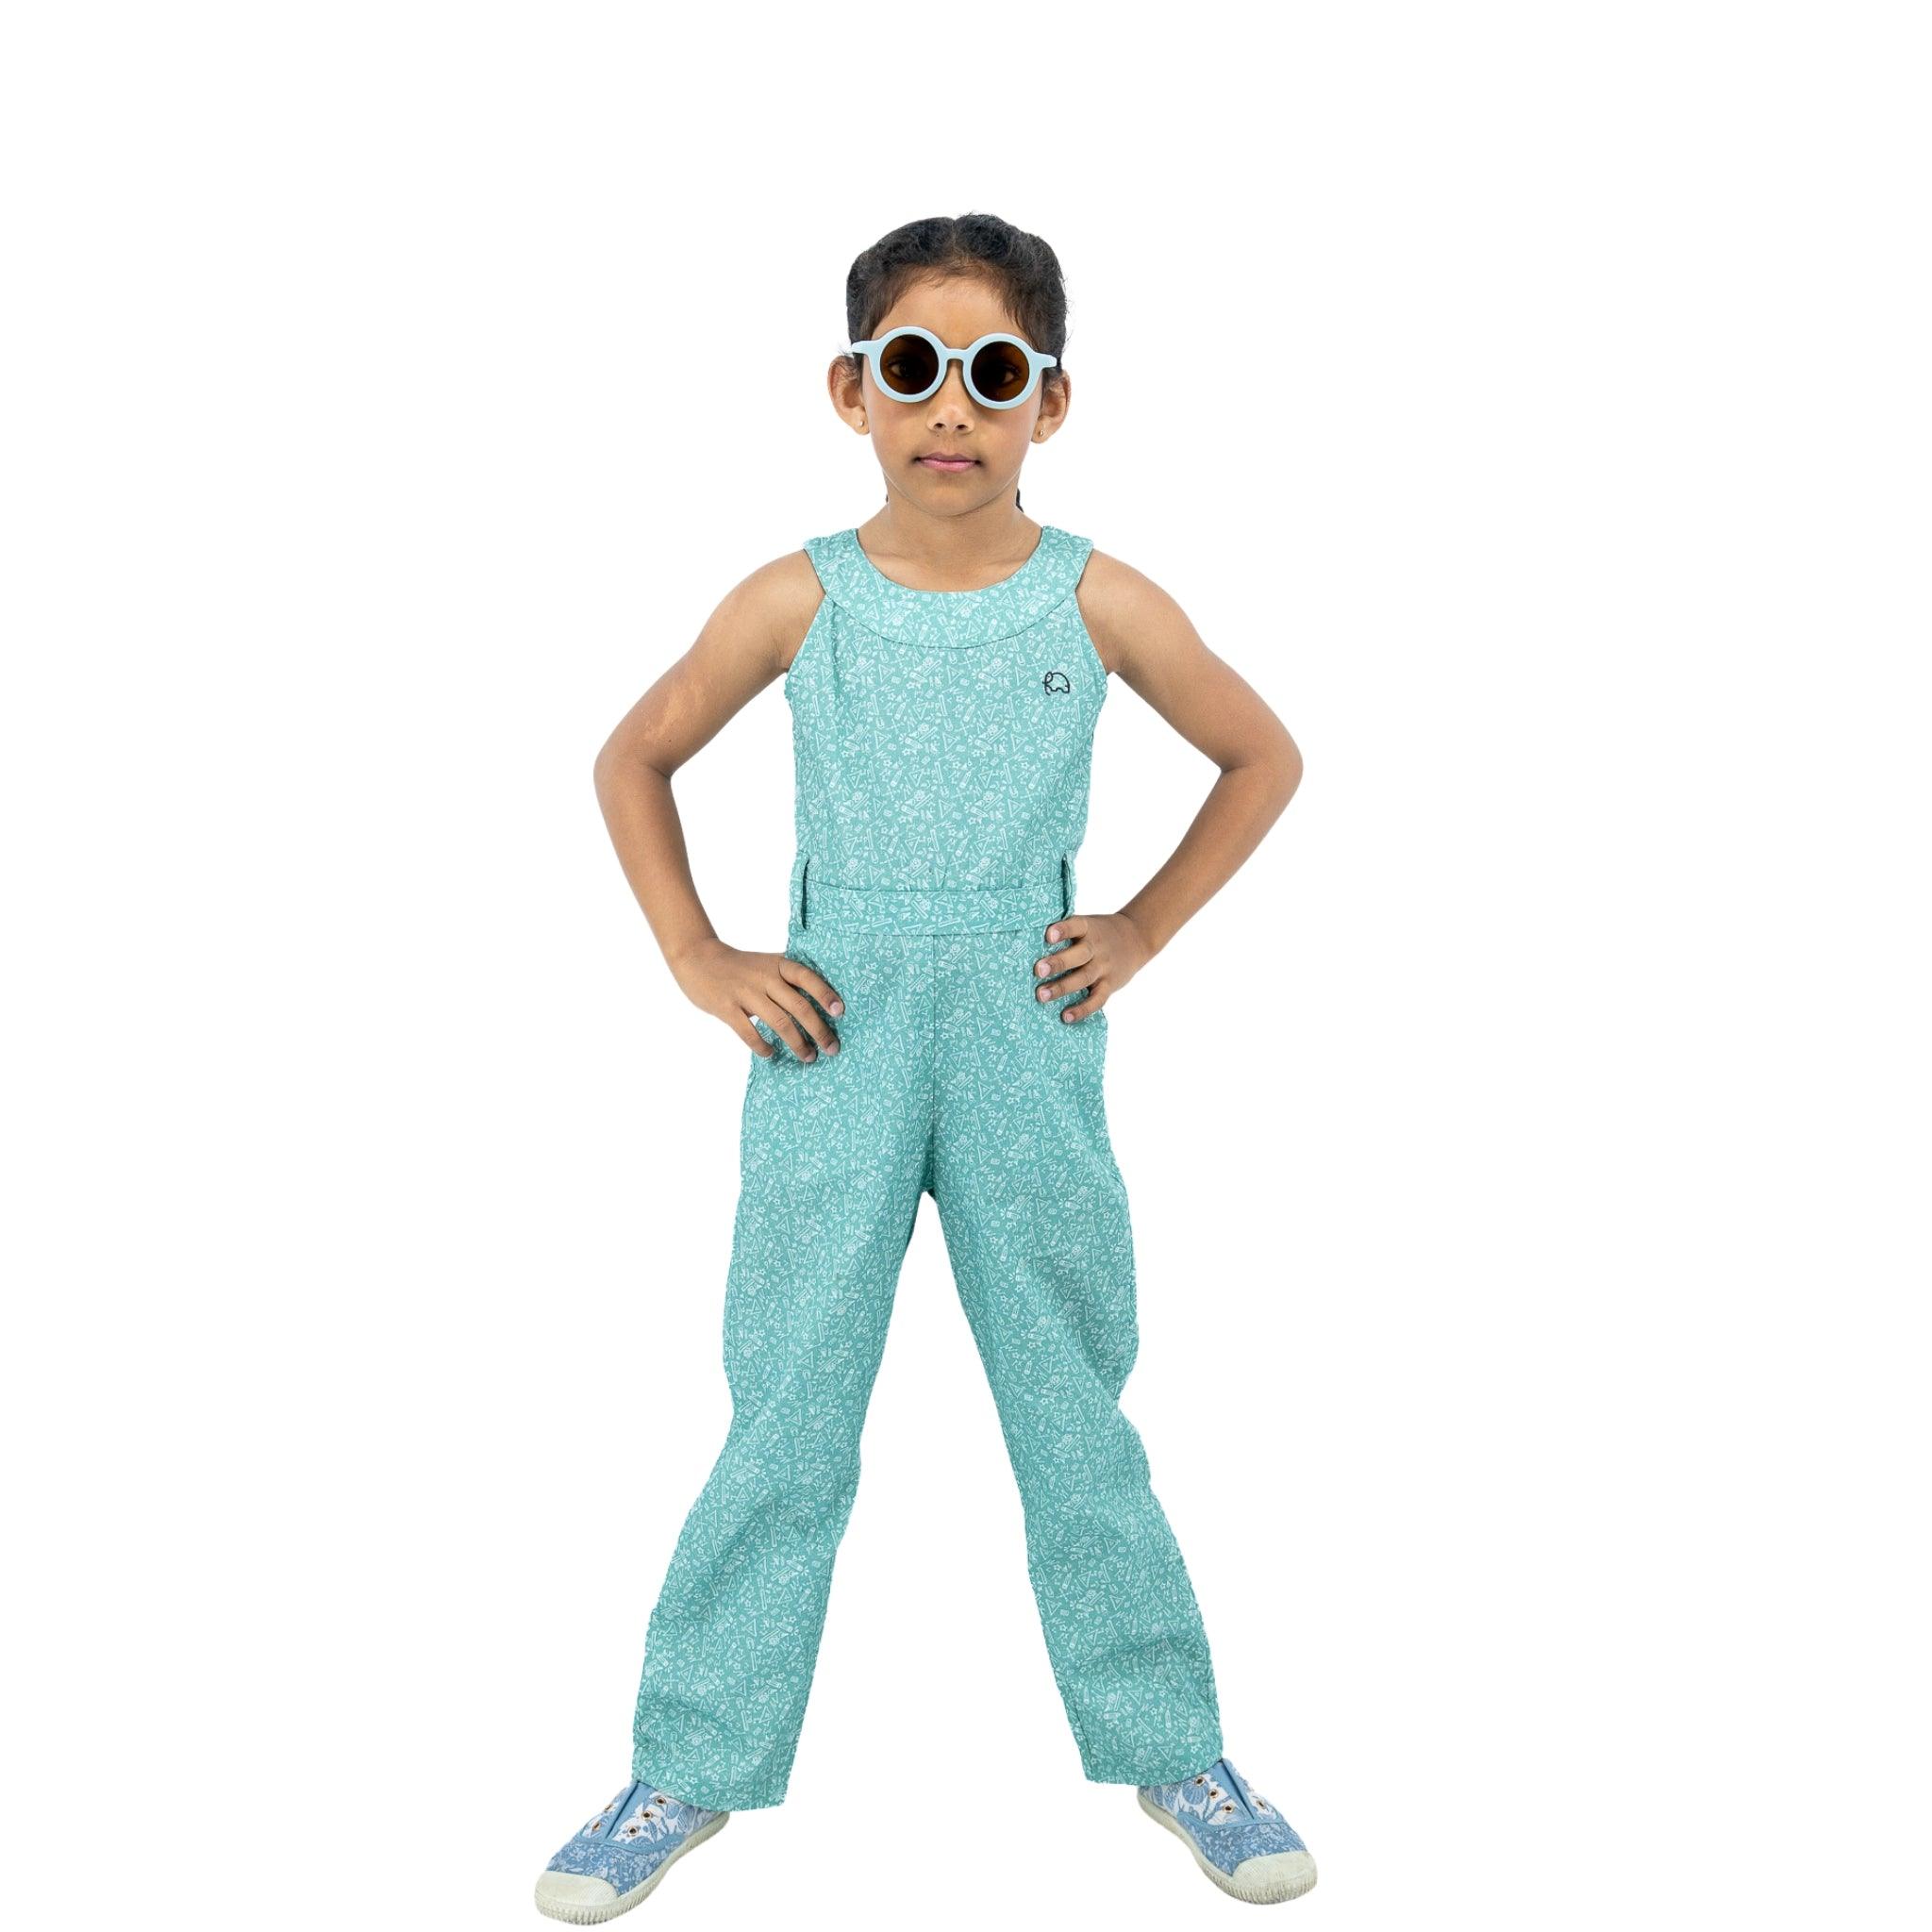 A young girl stands confidently wearing a Karee smoke green cotton jumpsuit and sunglasses, hands on hips, against a white background.